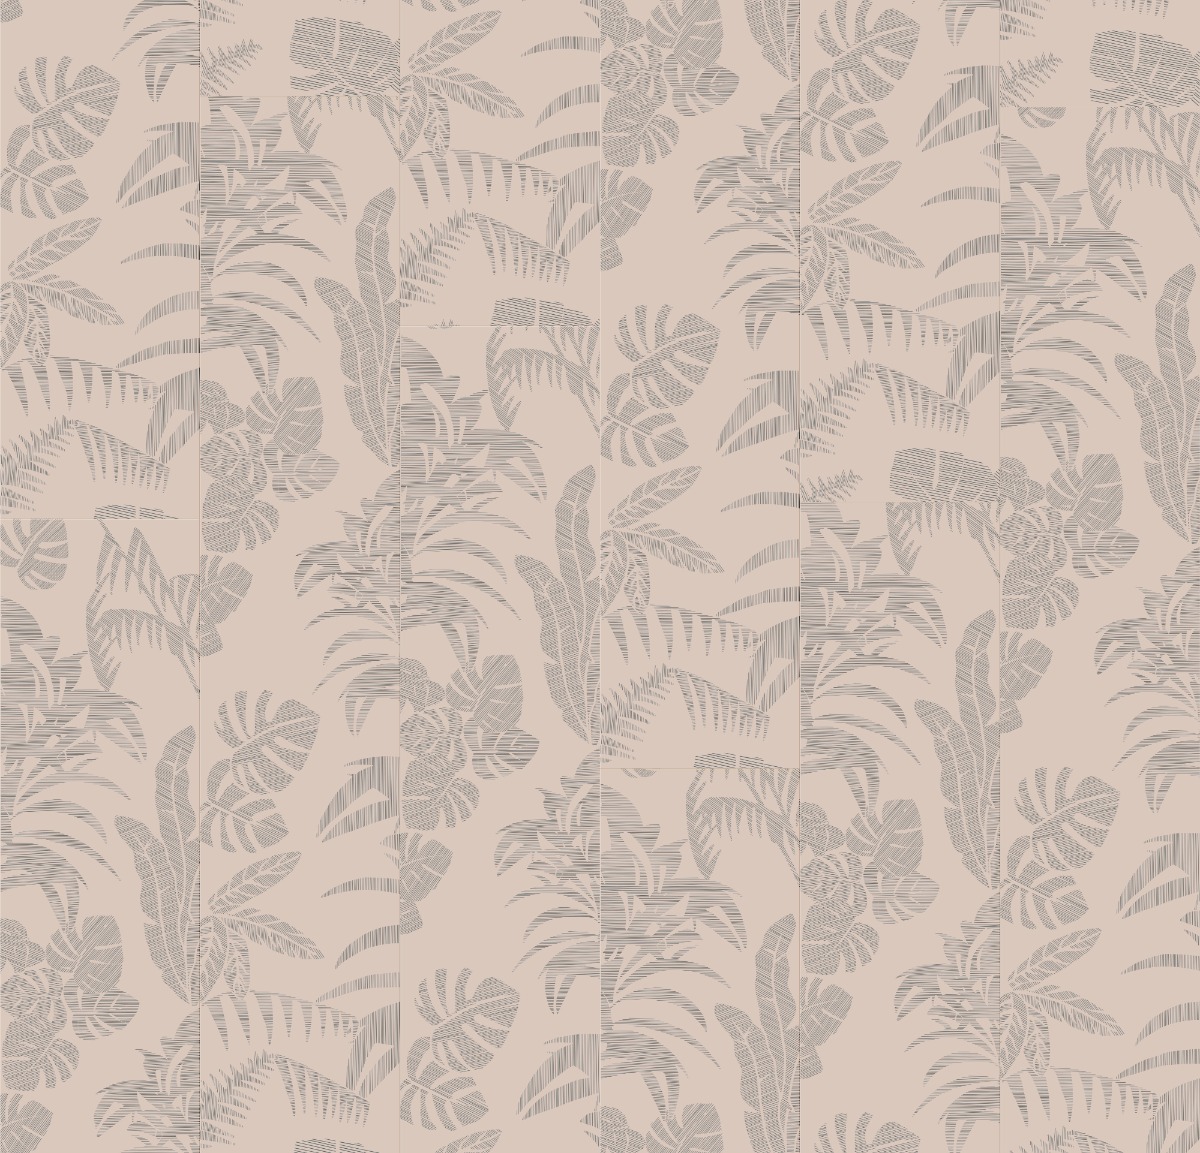 A seamless wallpaper texture with flourish wallpaper in pink cove units arranged in a  pattern